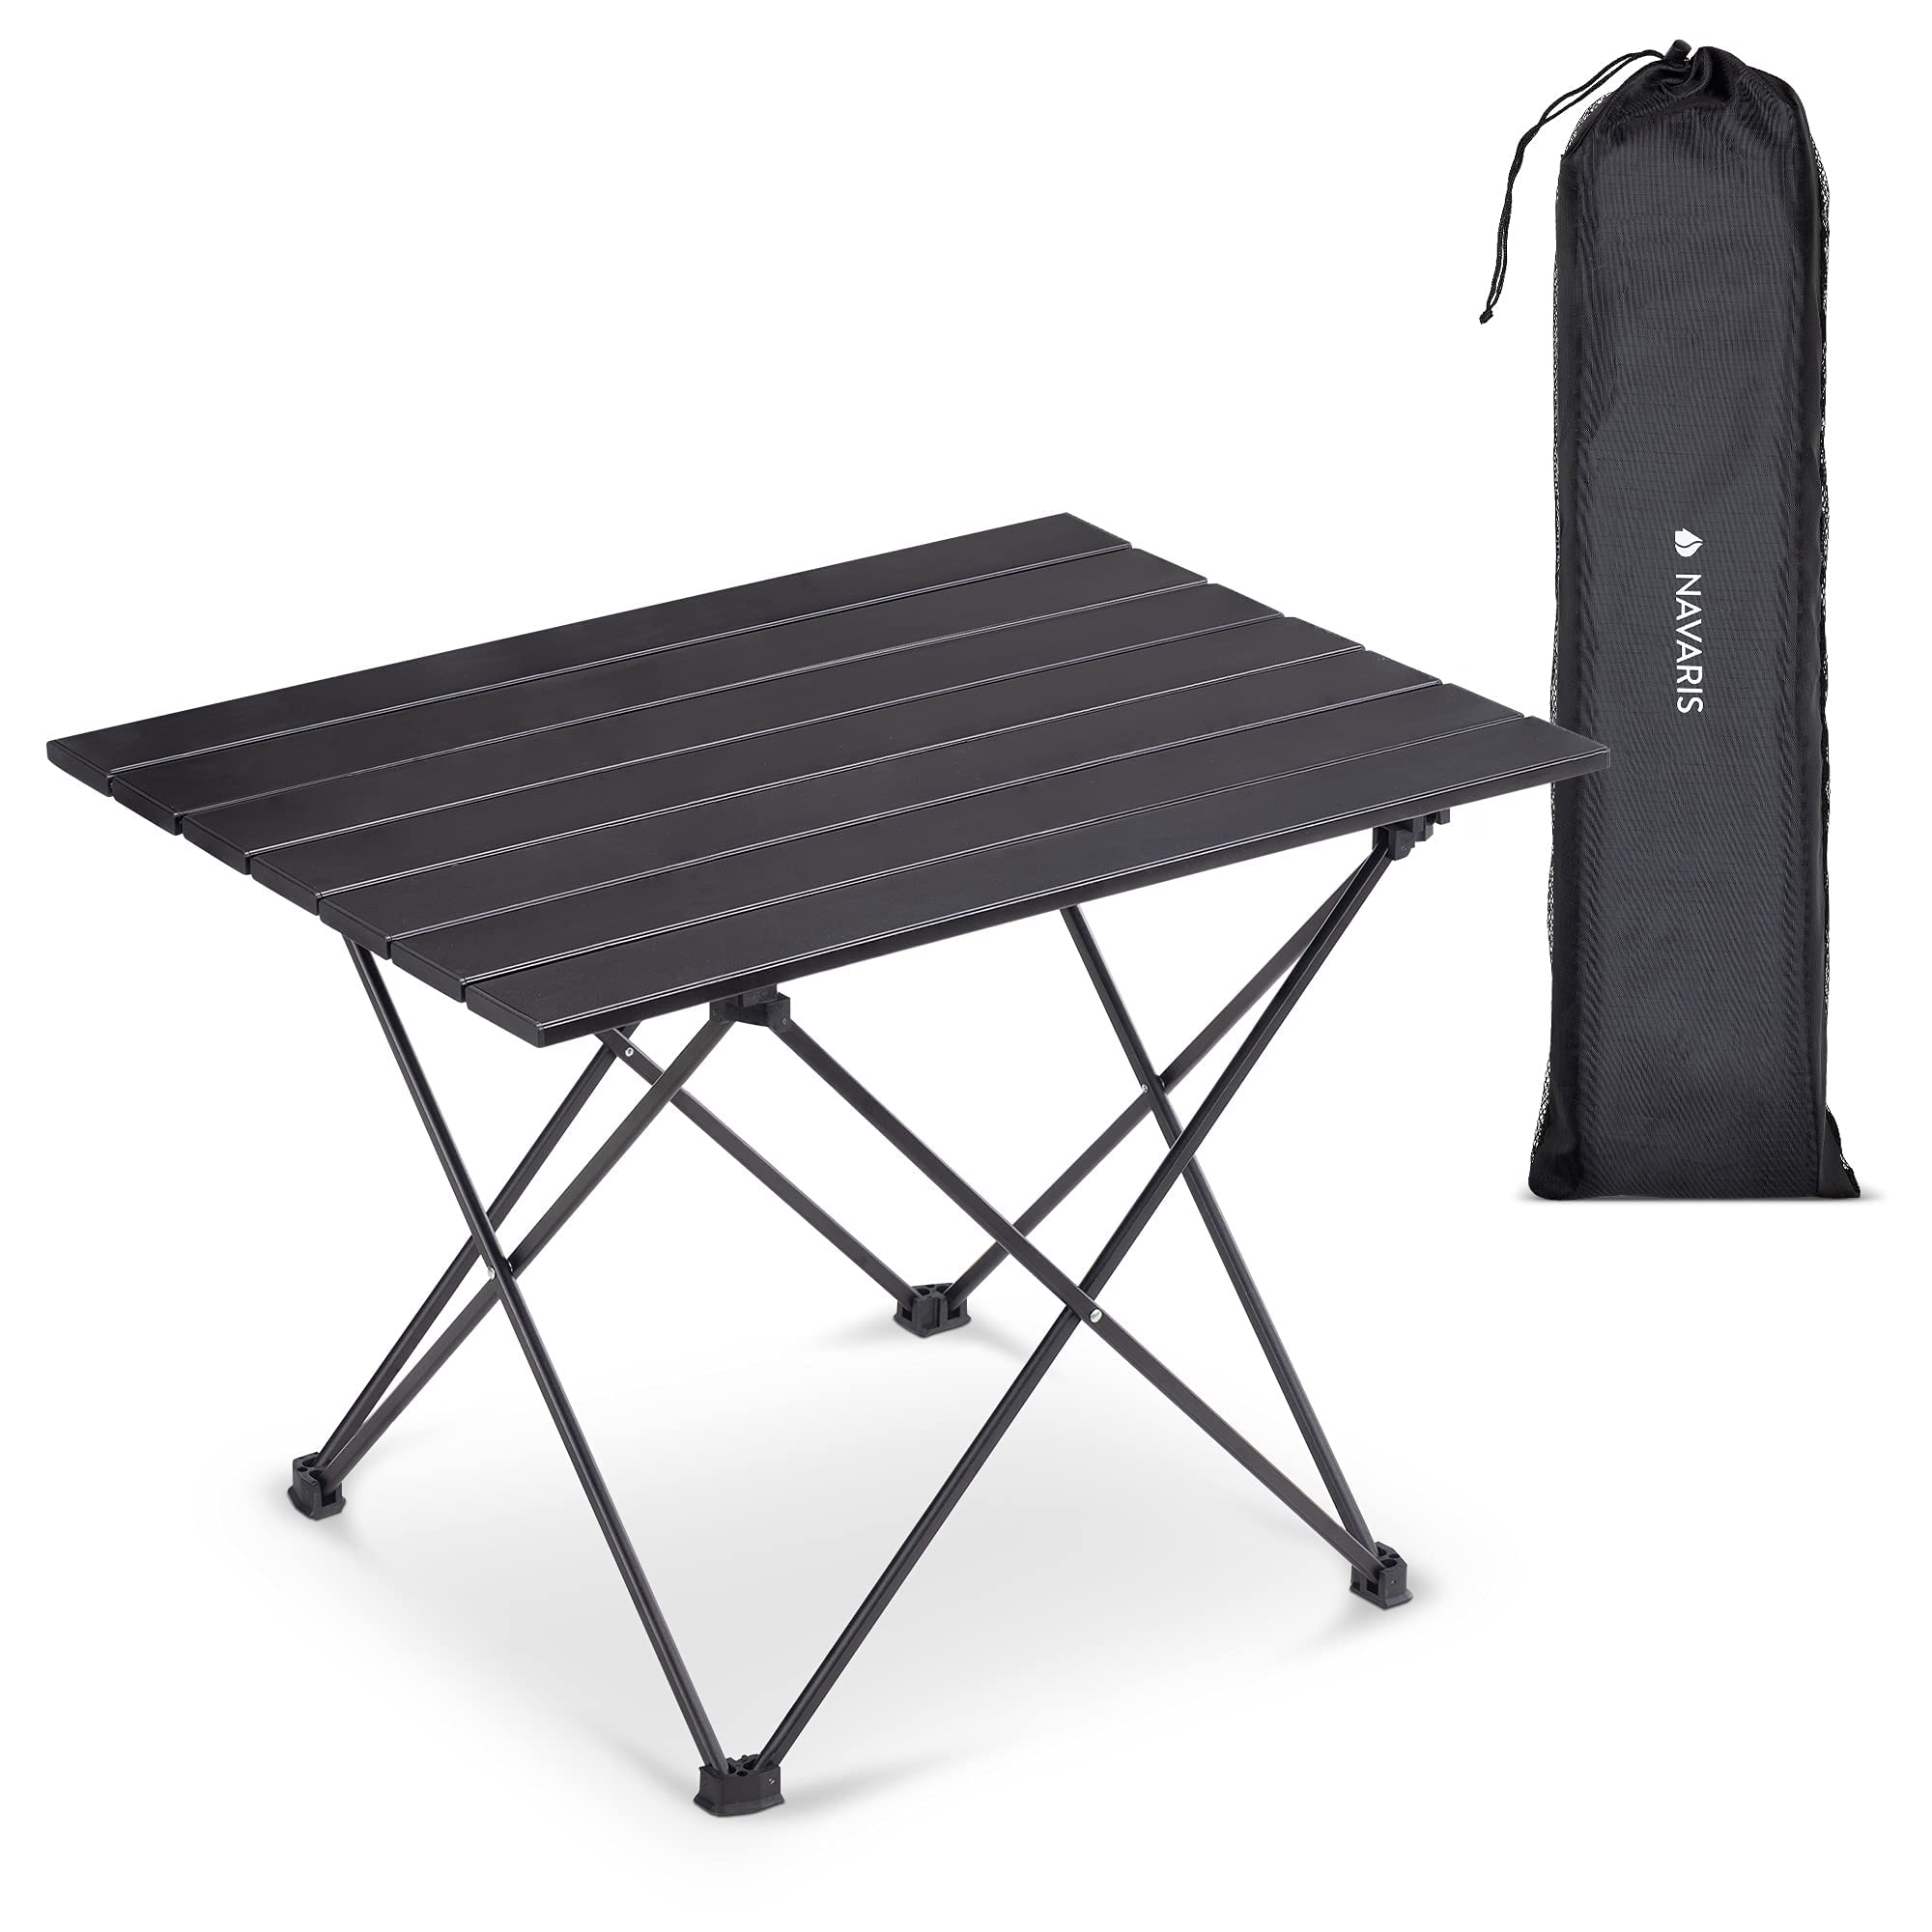 Need a Lightweight Camp Table That Folds Away. Discover the Best Aluminum Roll Up Camping Tables